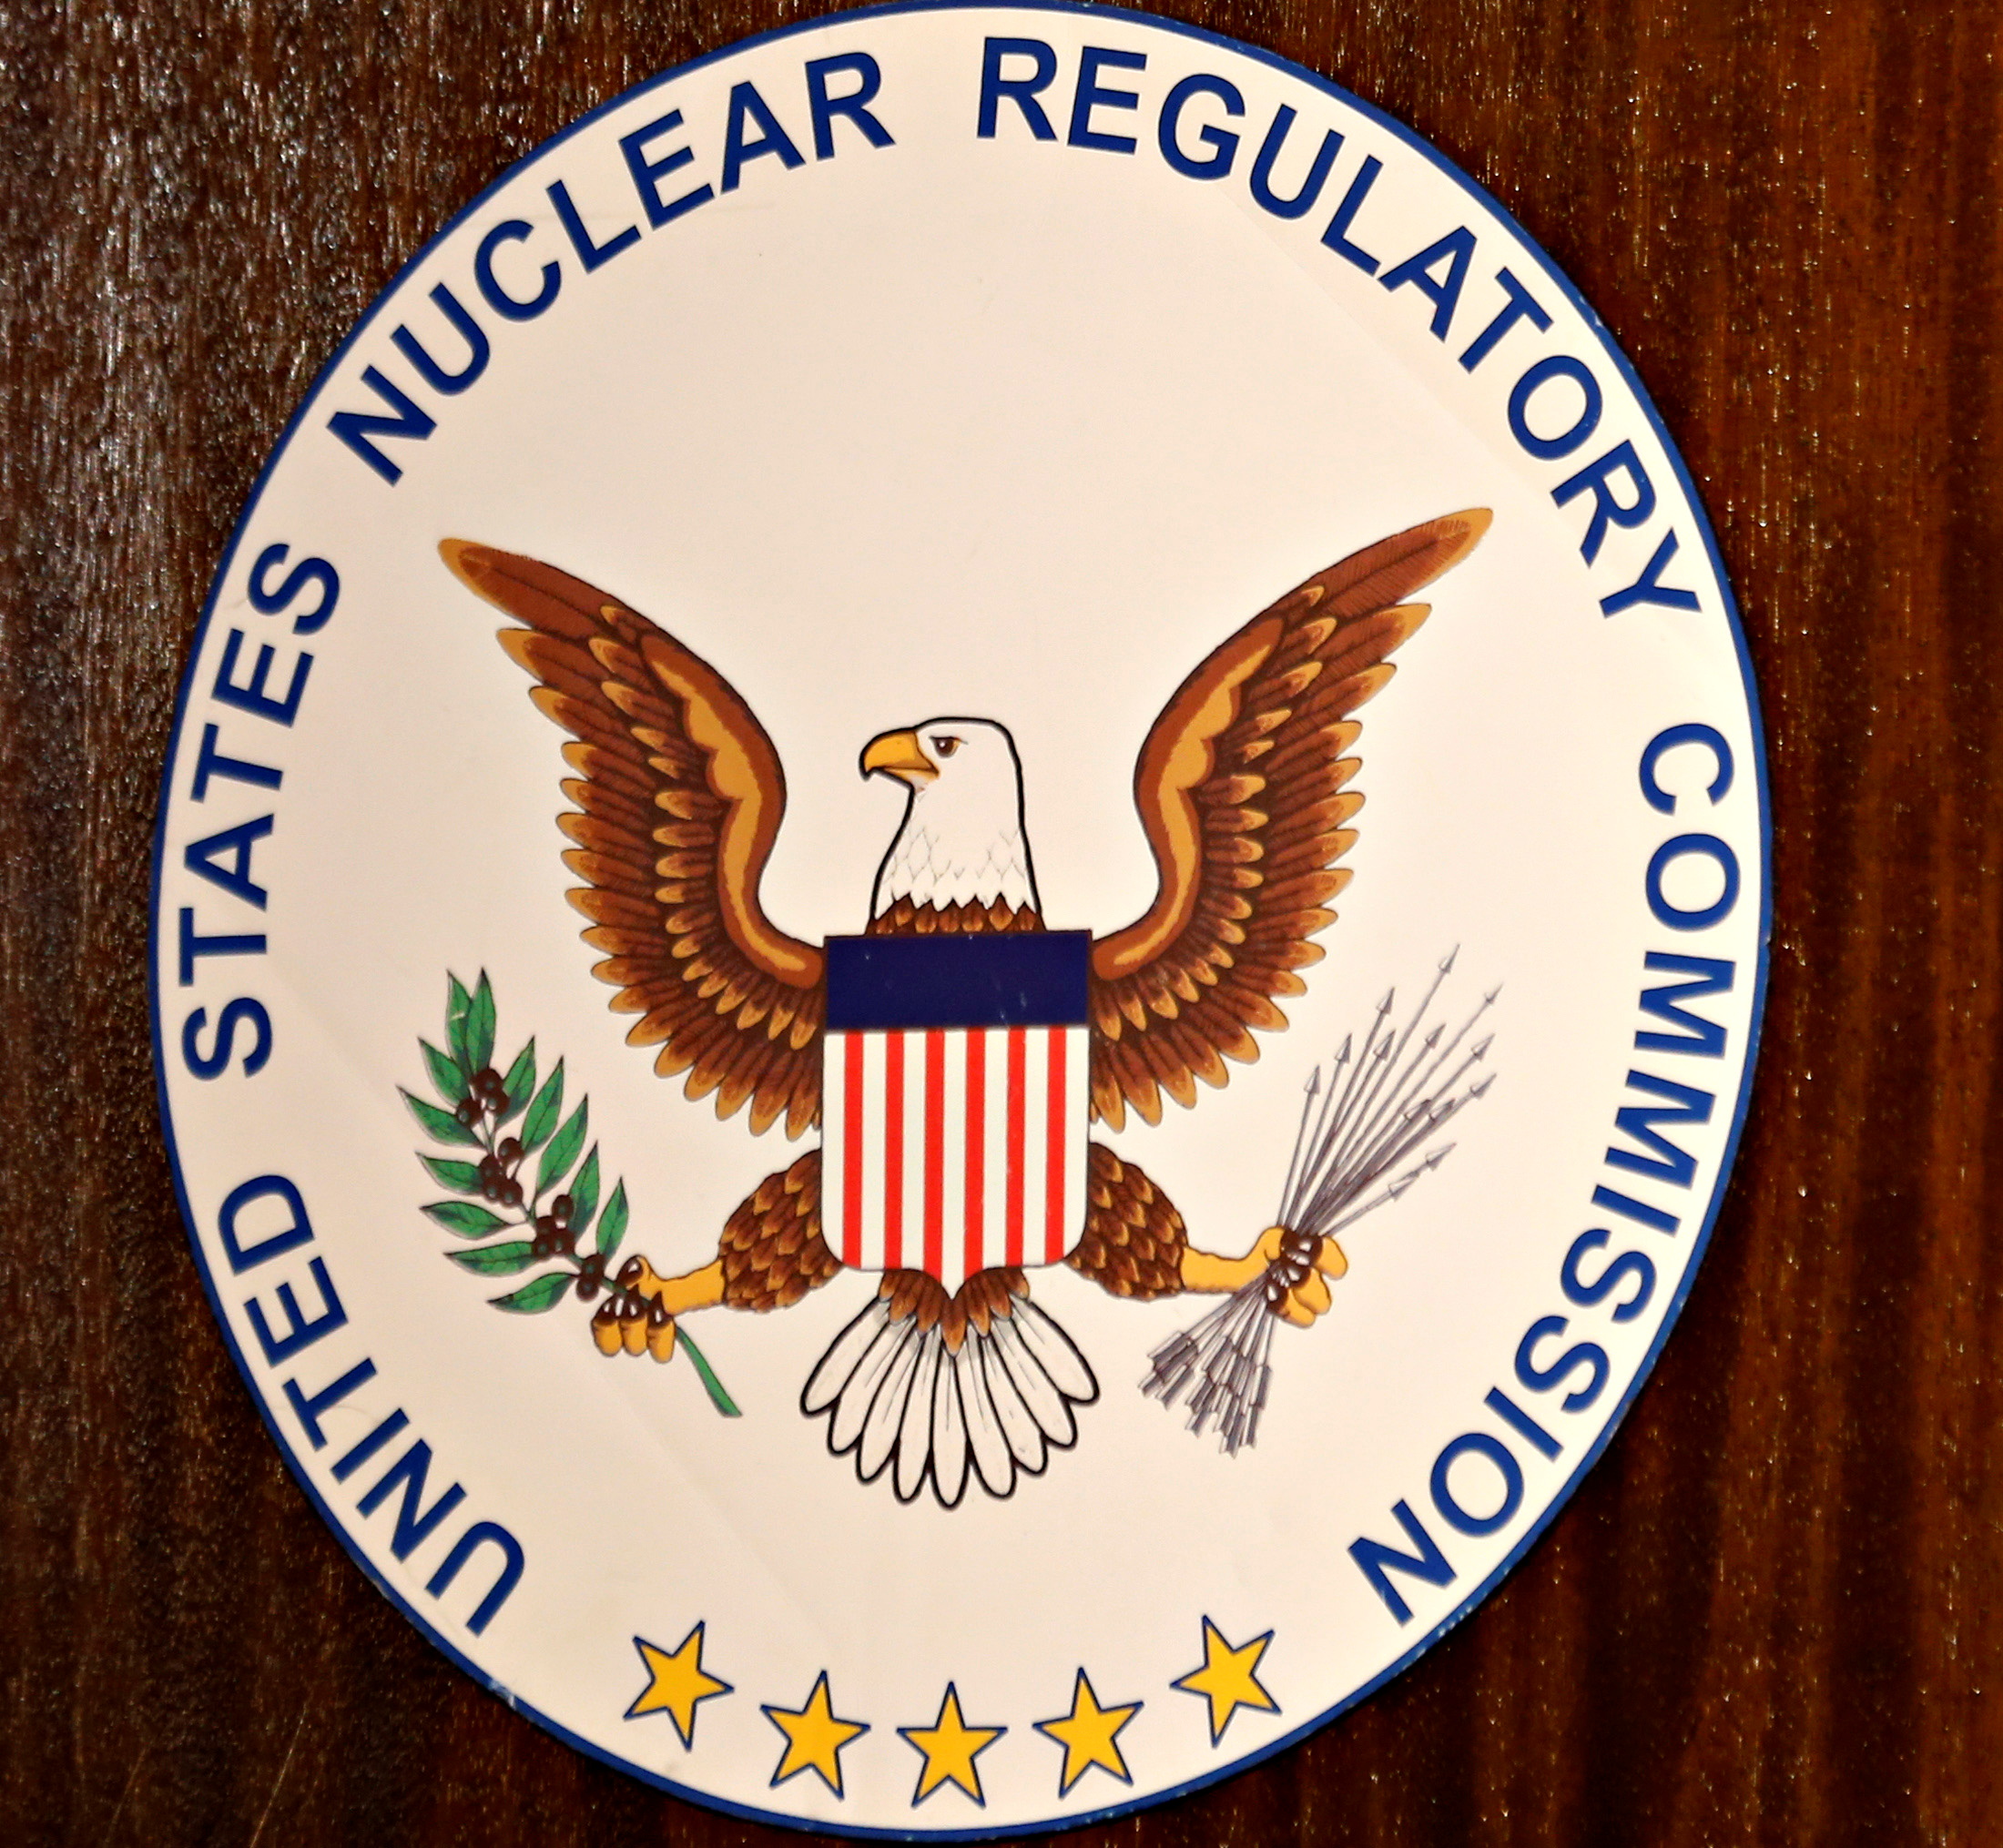 u-s-suspends-authority-to-ship-nuclear-materials-to-china-s-cgn-reuters